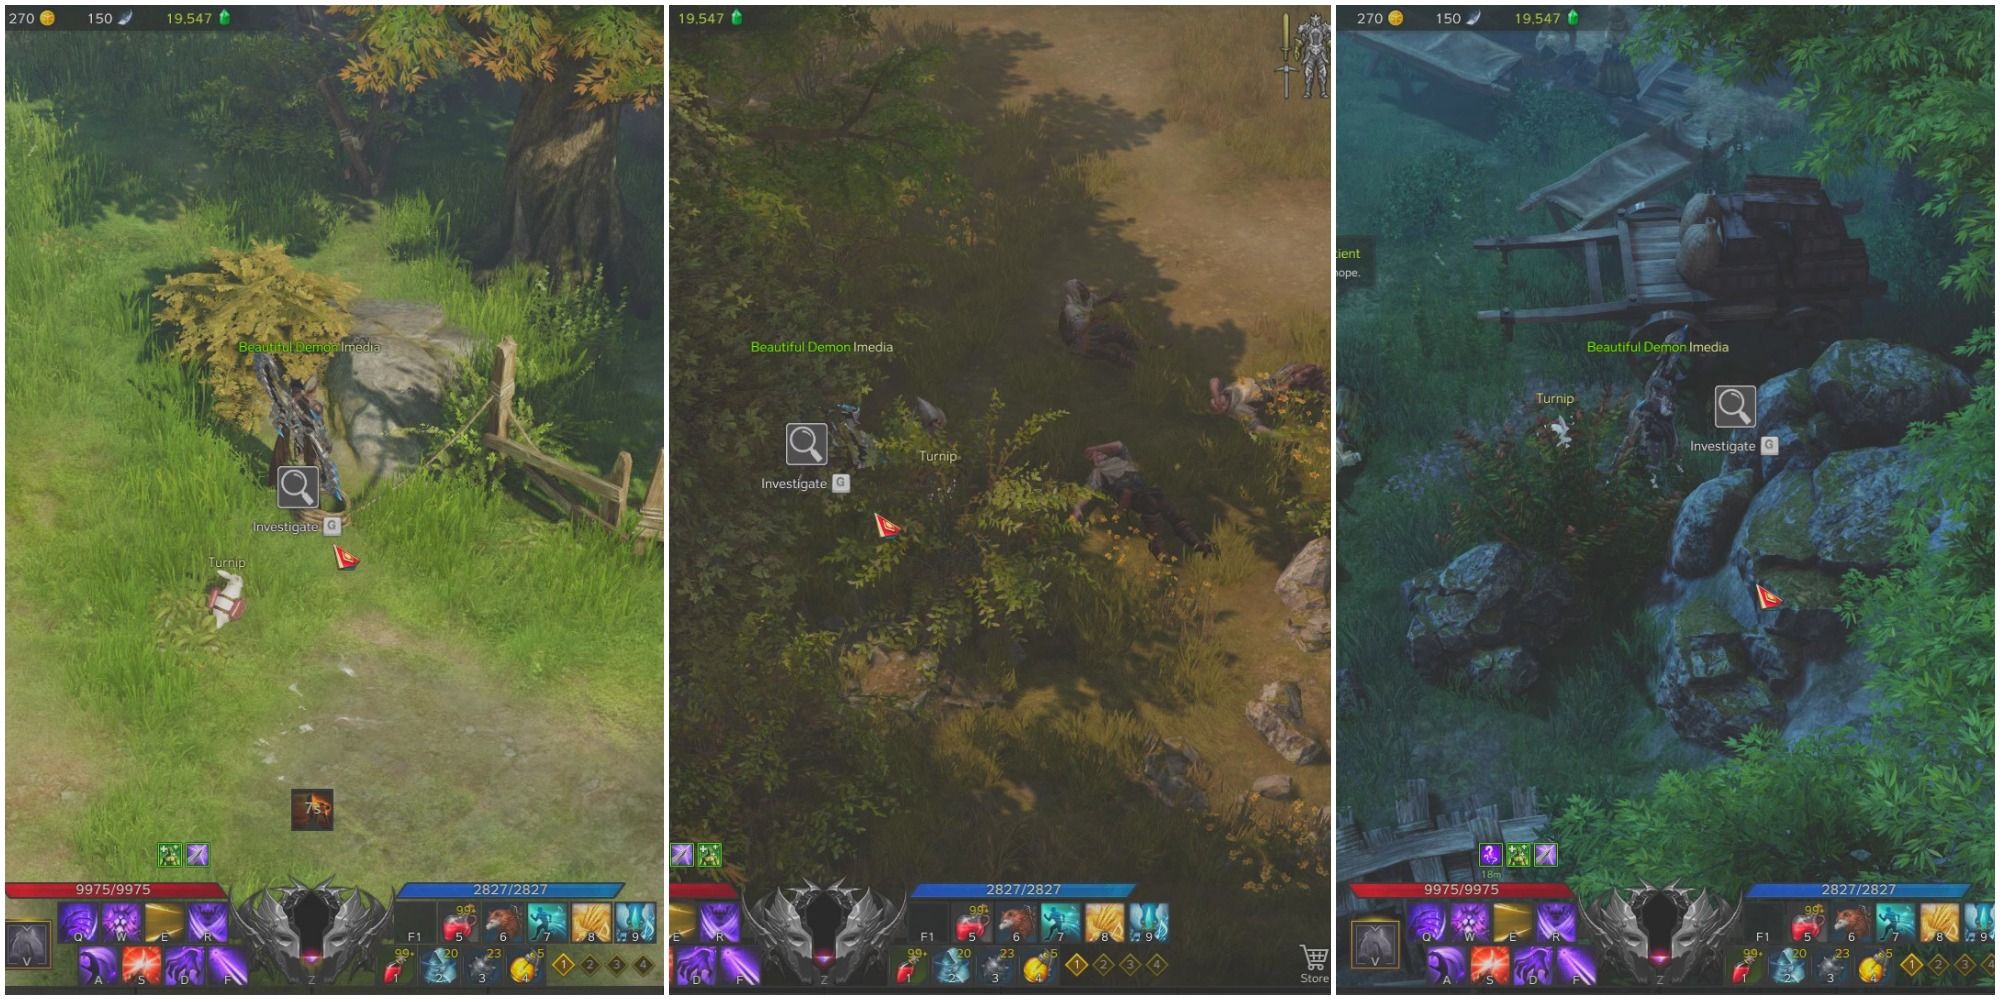 A split image of a shadowhunter investigating a rope pile, a shadowhunter investigating some bushes, and a shadowhunter investigating rocks by an infirmary